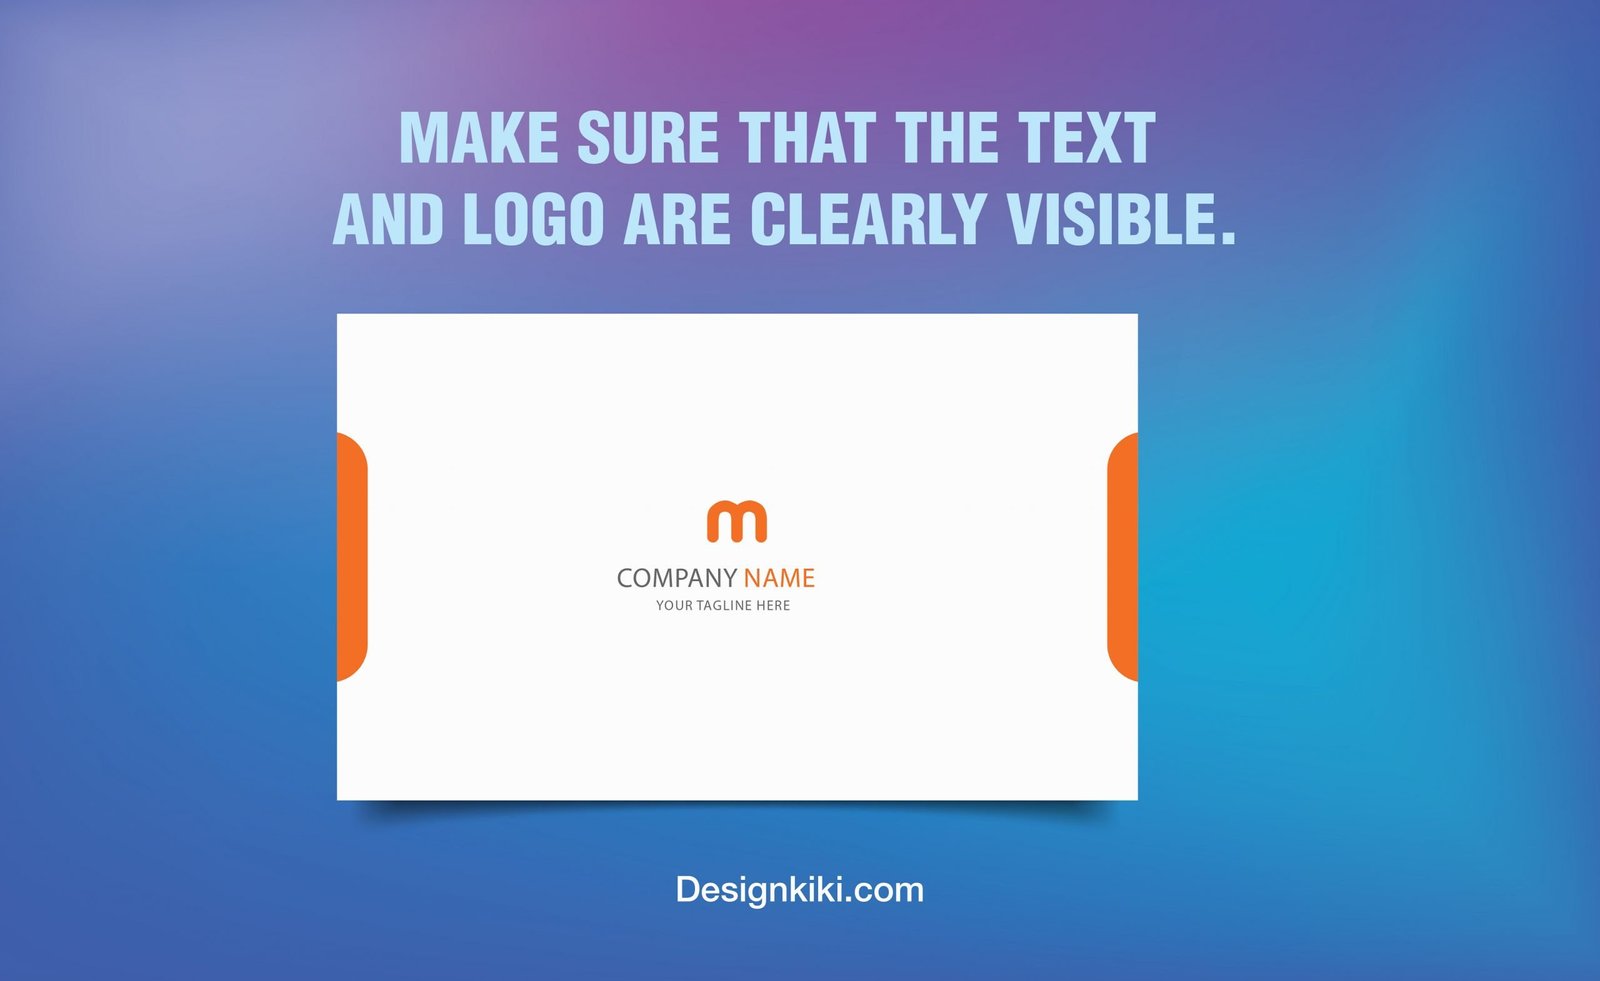 Make sure that the text and logo are visible.